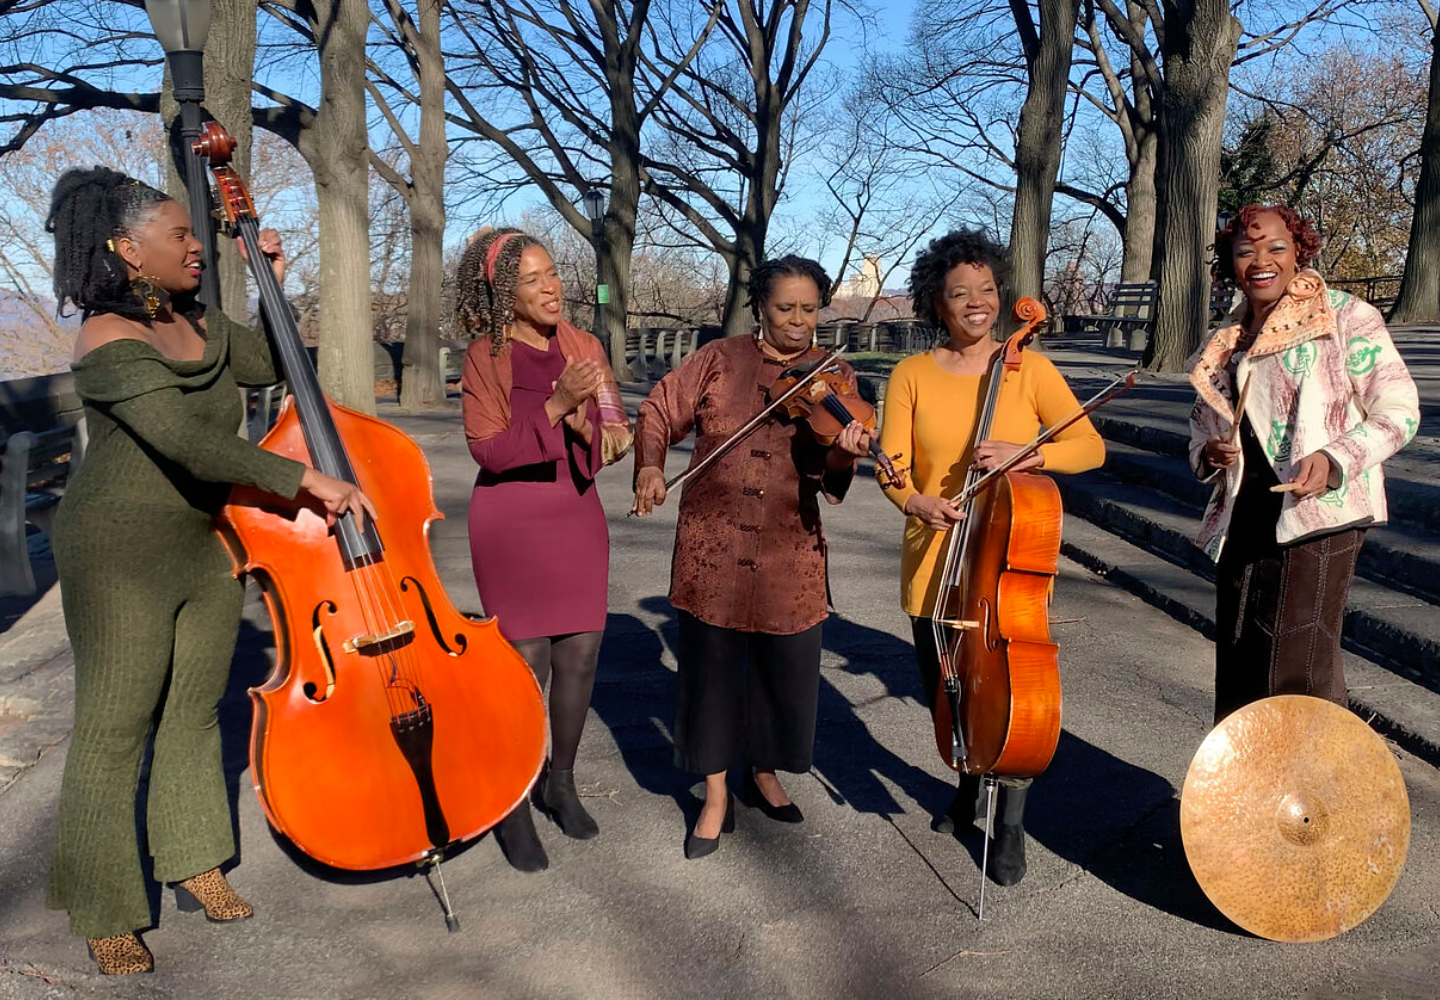 Women’s Jazz Festival 2021: The Intellectual Life of Black Feminist Sound with Daphne Brooks and Fiery String Sistas!